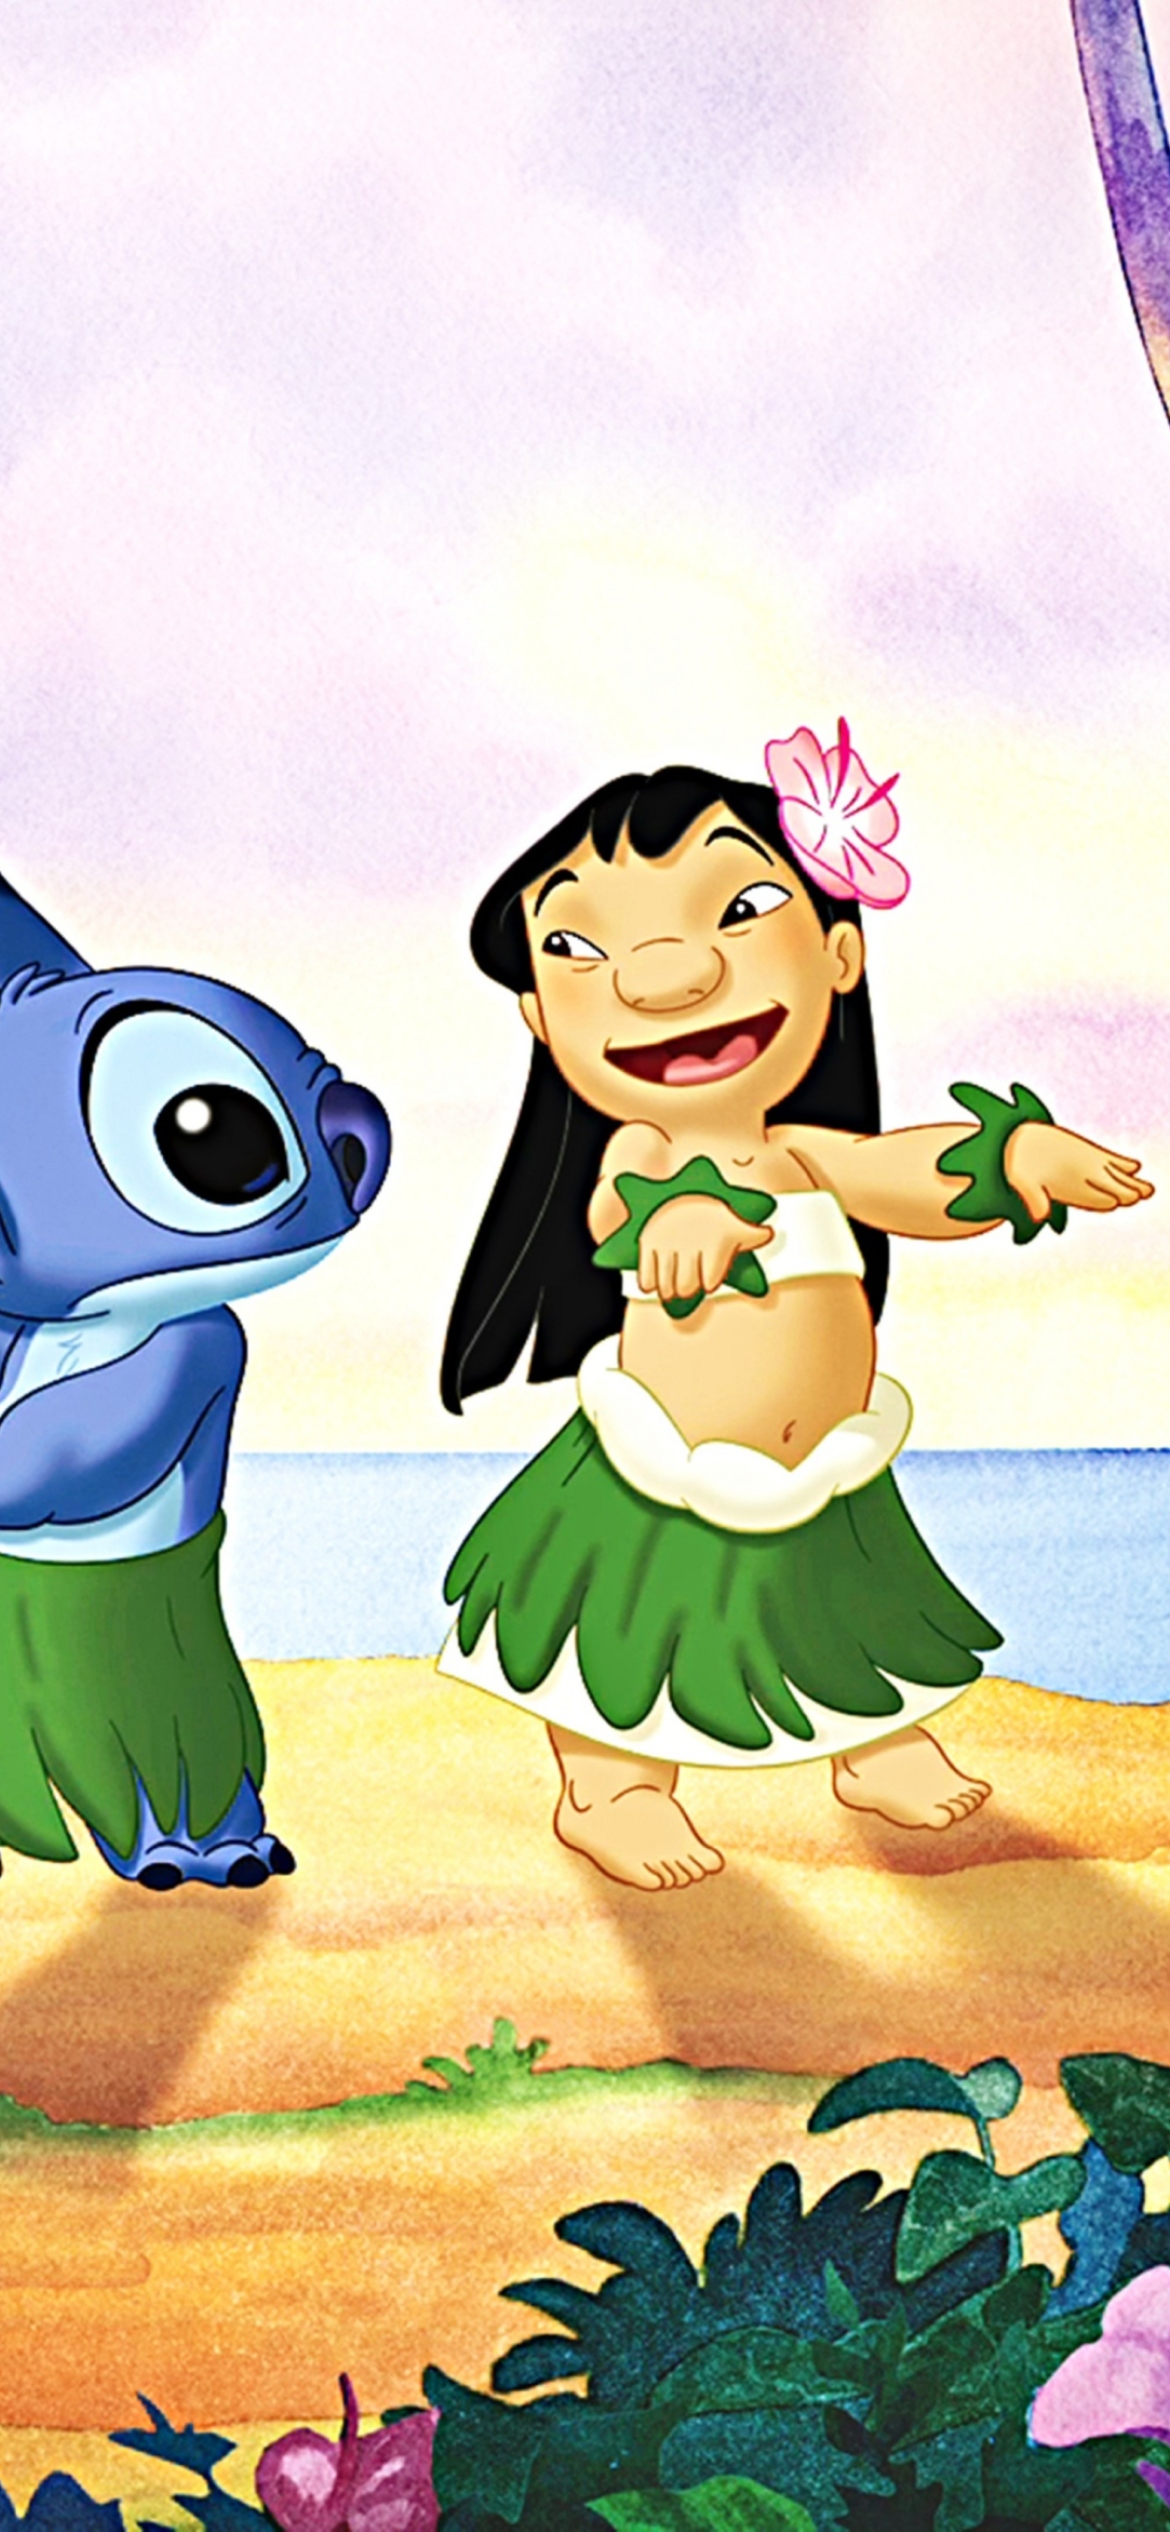 Lilo Stitch HD Wallpapers 1000 Free Lilo Stitch Wallpaper Images For All  Devices